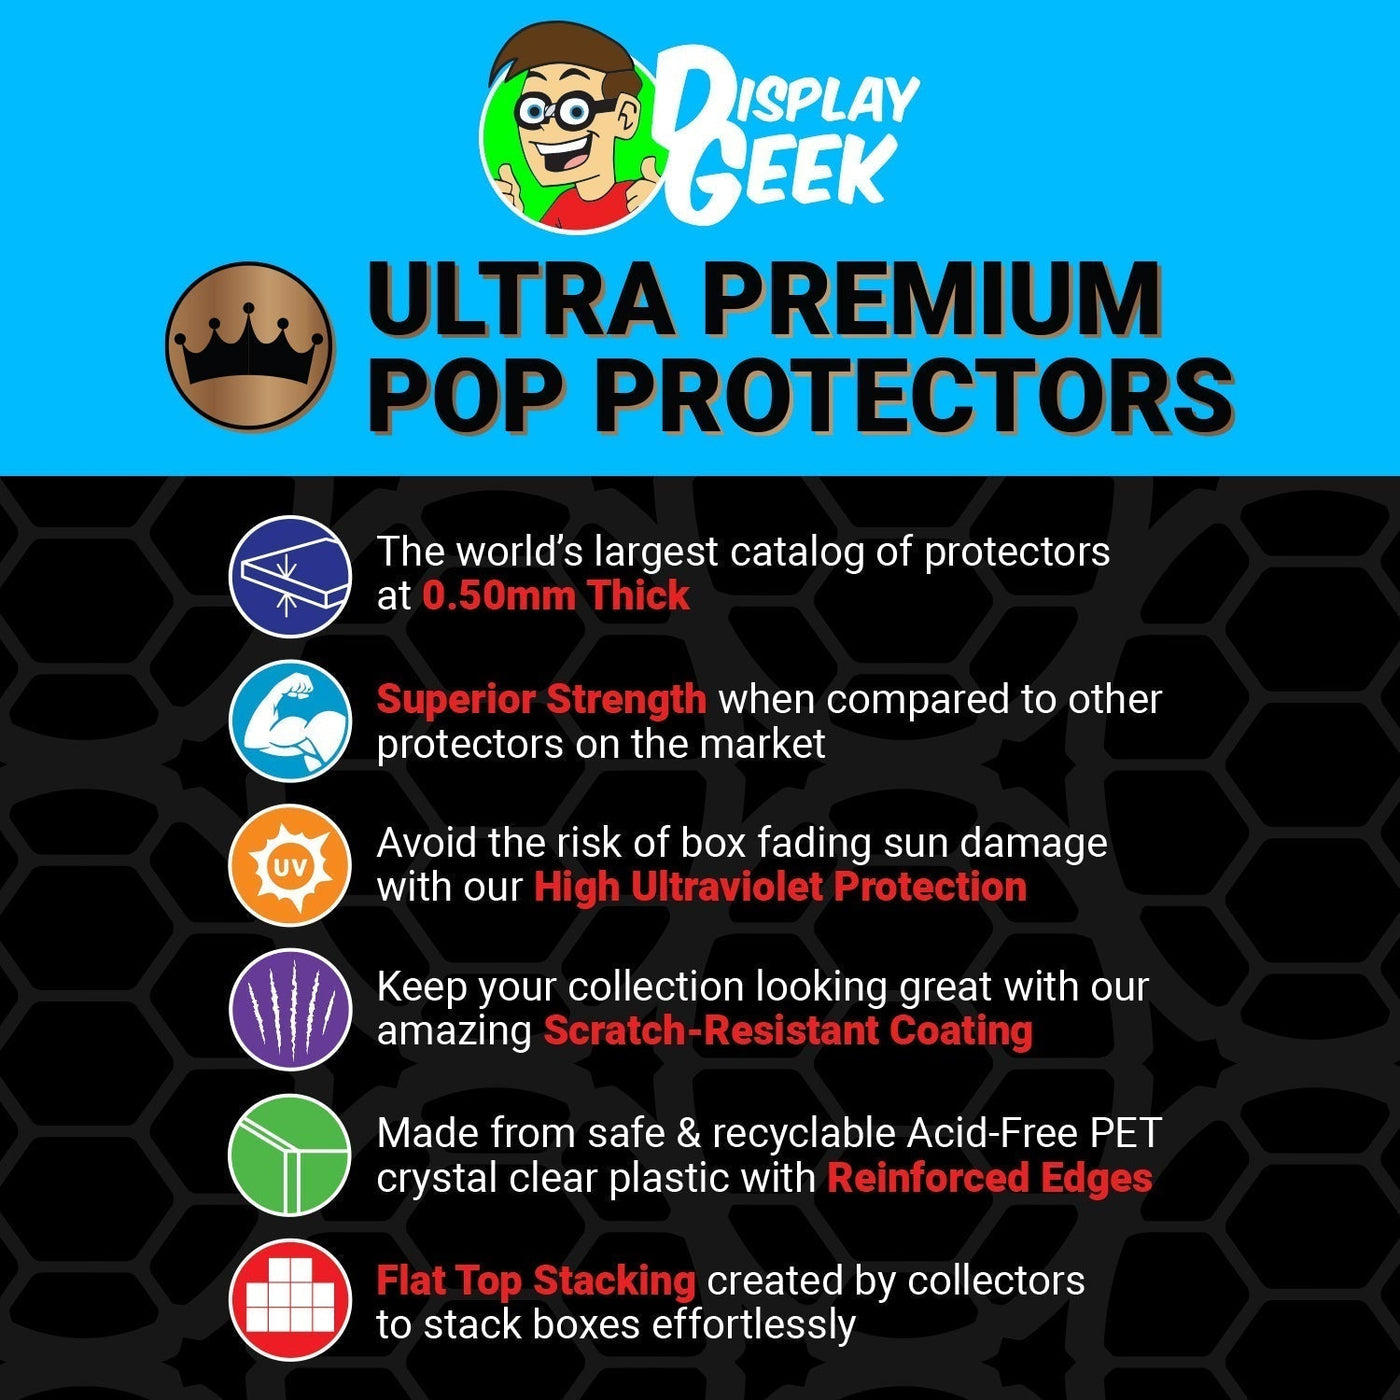 Pop Protector for Talking Turbo Man Action FIgure Funko on The Protector Guide App by Display Geek